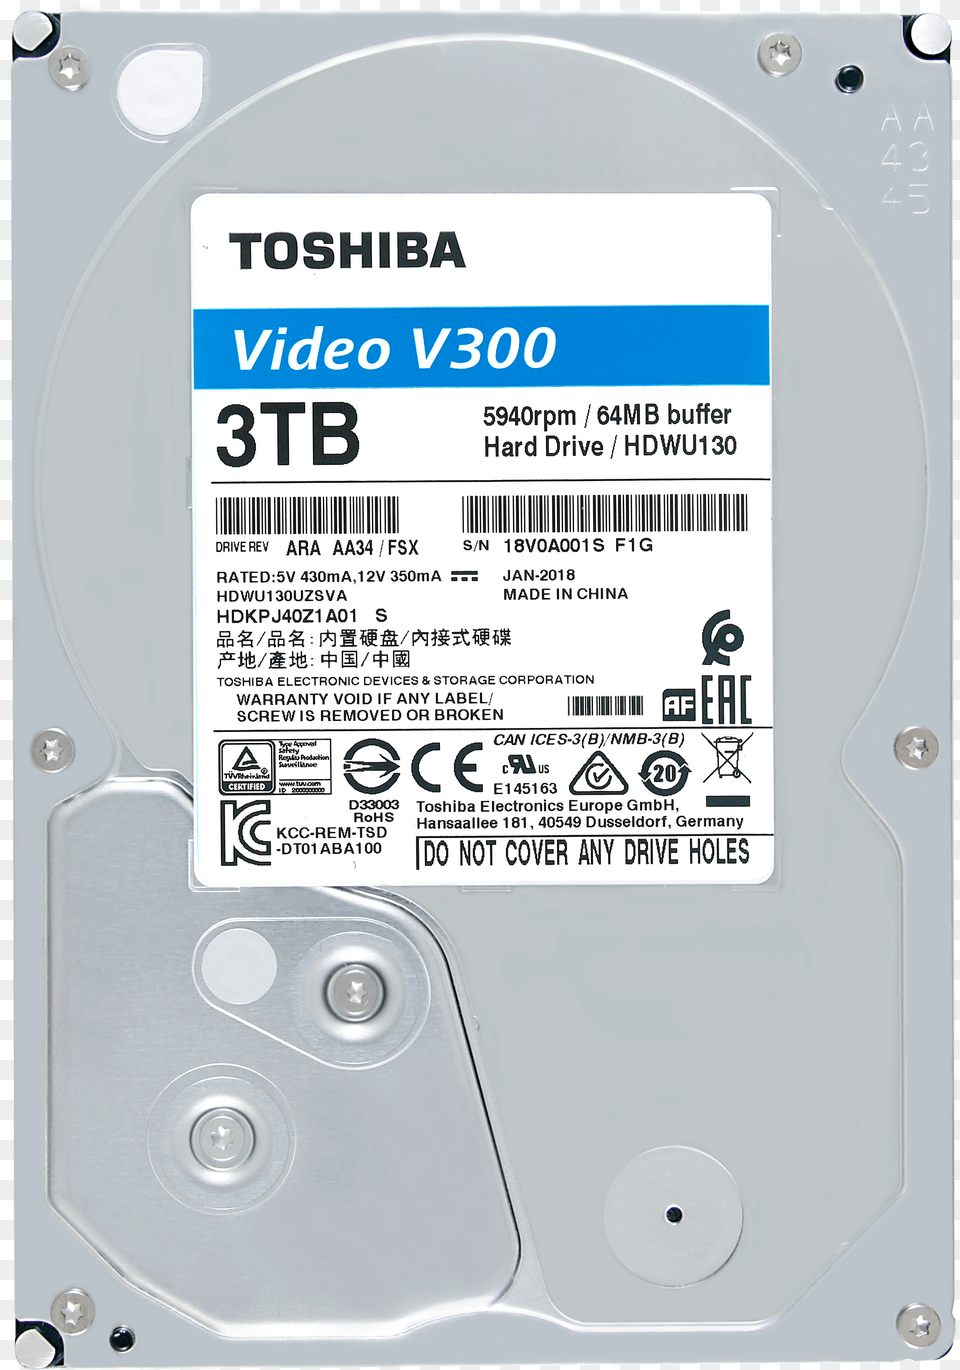 Toshiba Releases New Powerful Surveillance And Video Hdd Toshiba V300 2tb Png Image